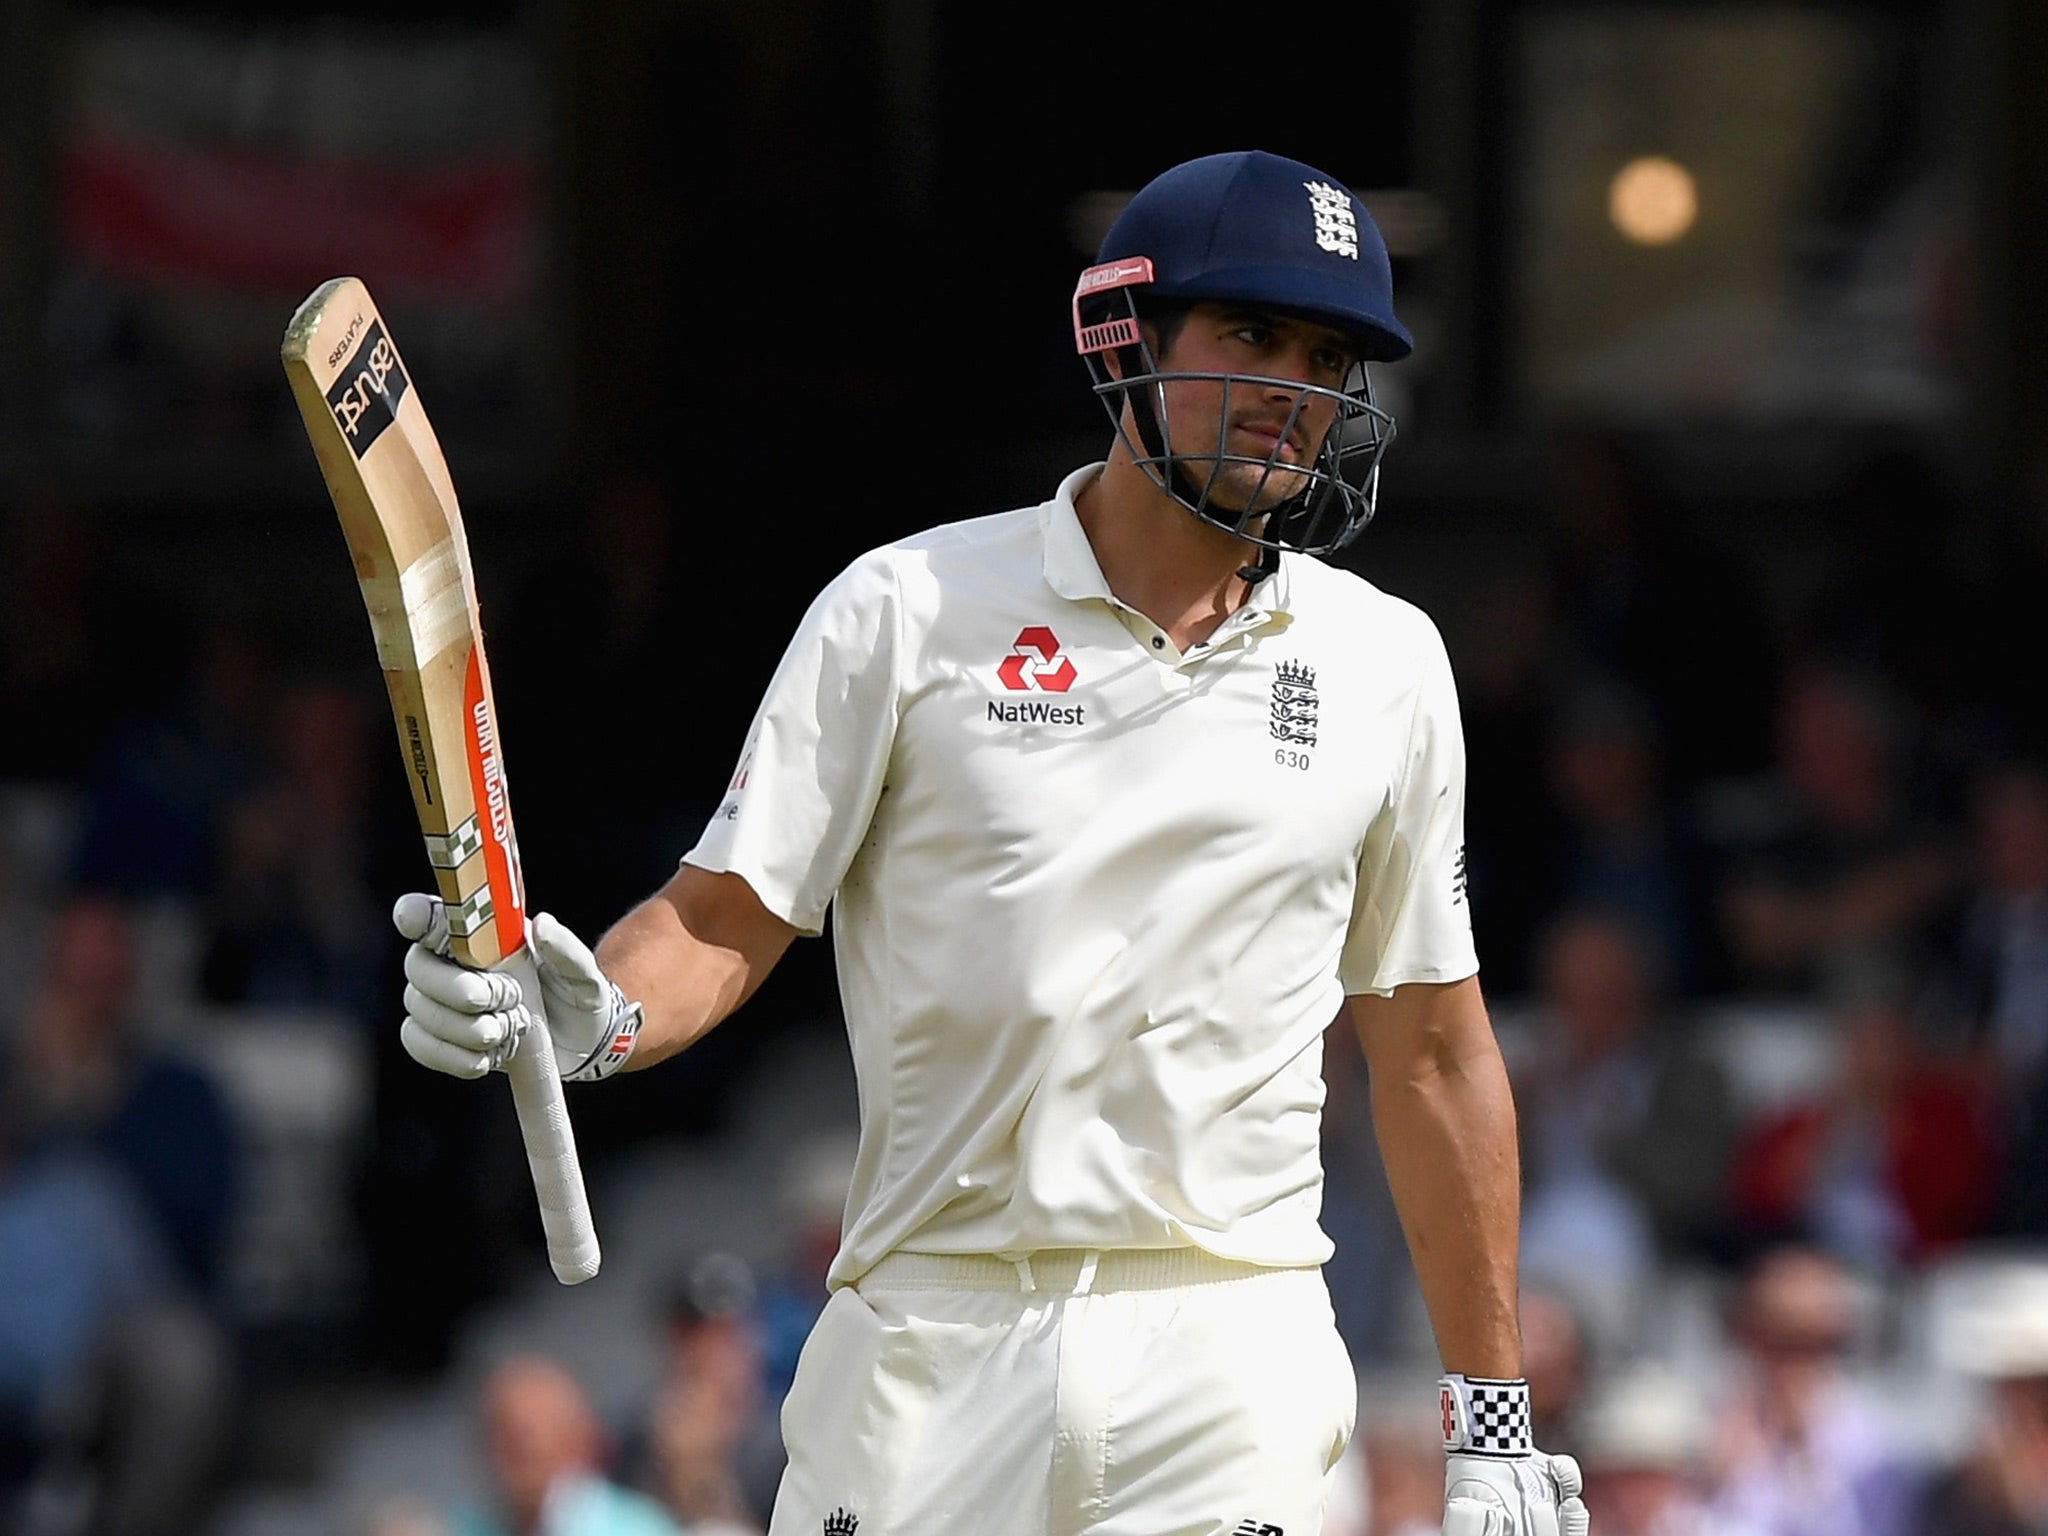 A battling and unbeaten showing from Alastair Cook gave England hope on the first day